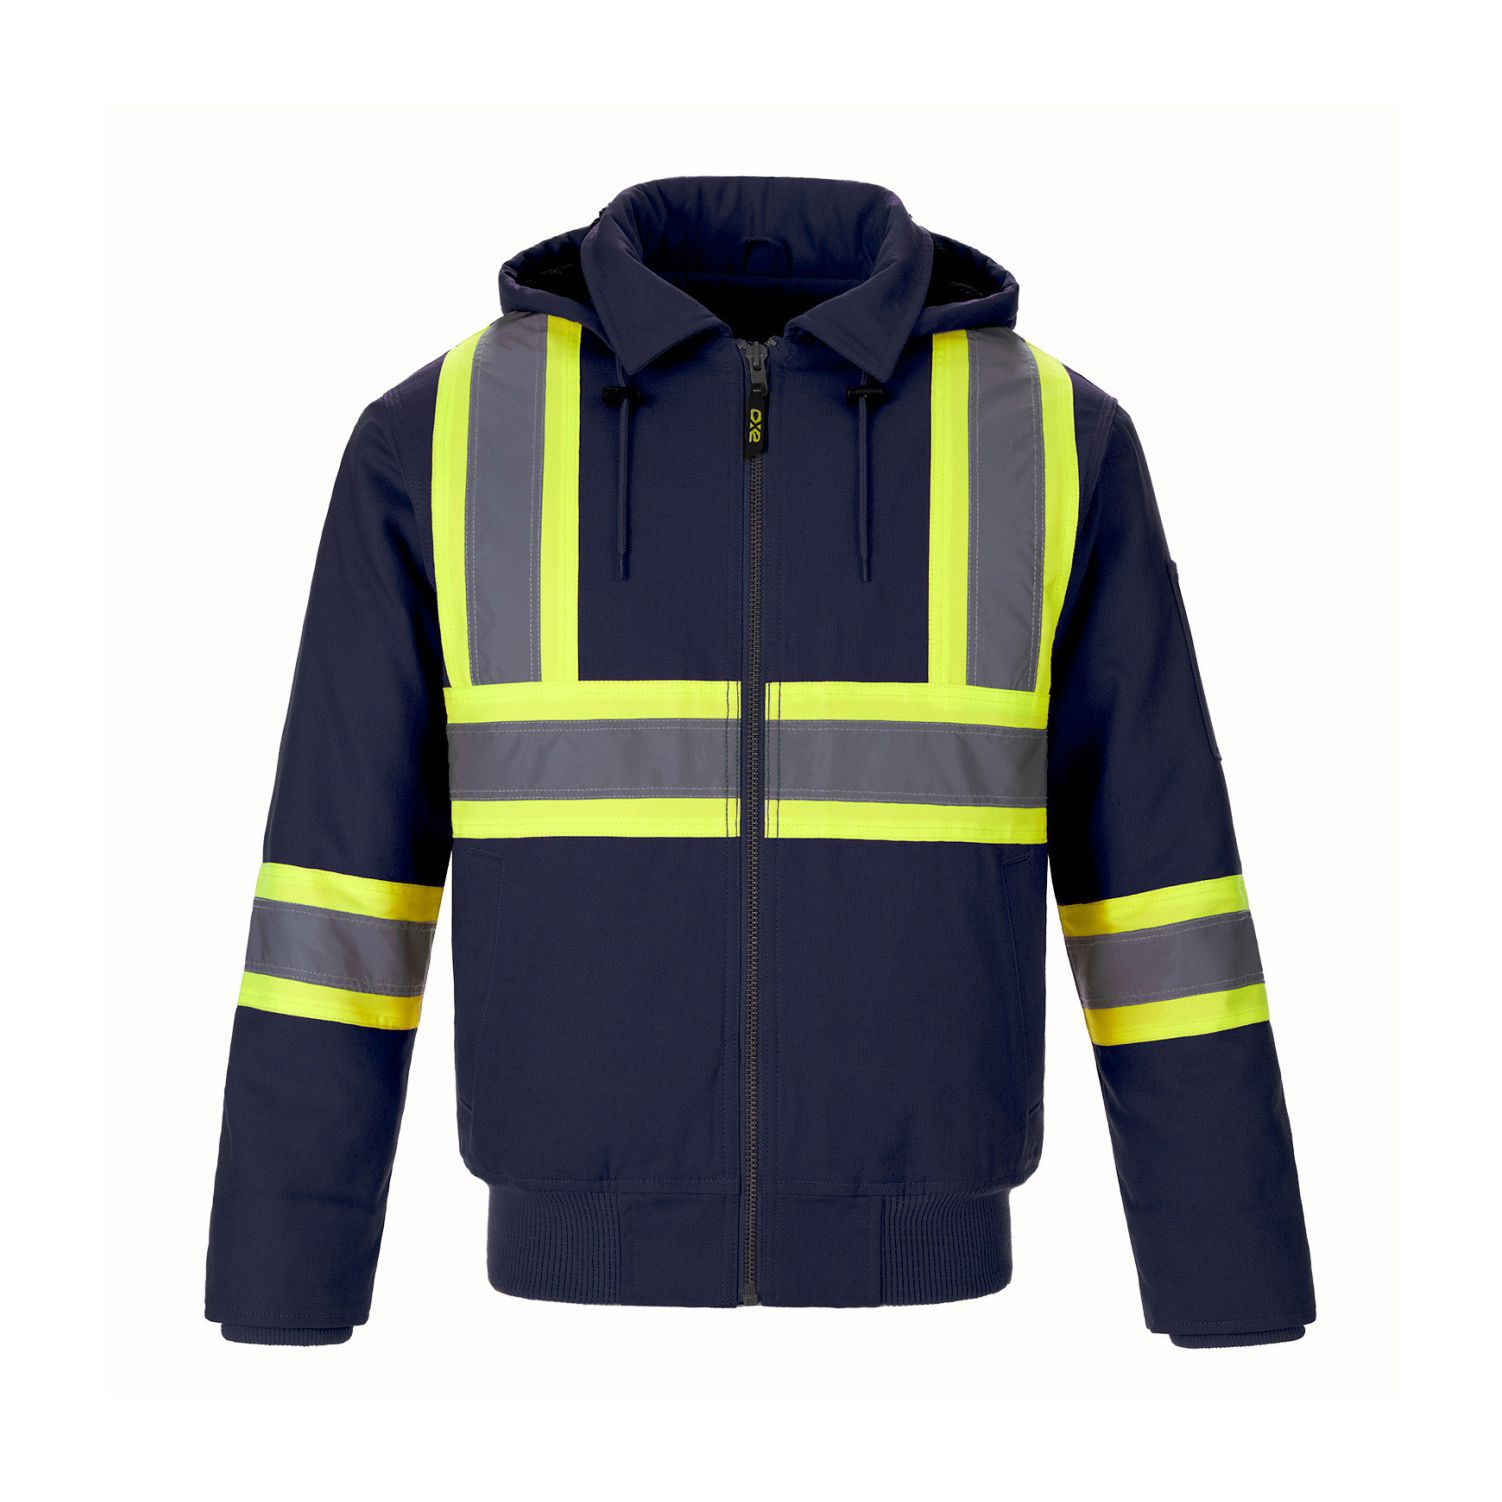 Canada Sportswear HiVis Bomber Jacket with Sherpa Lining #L01290 Navy